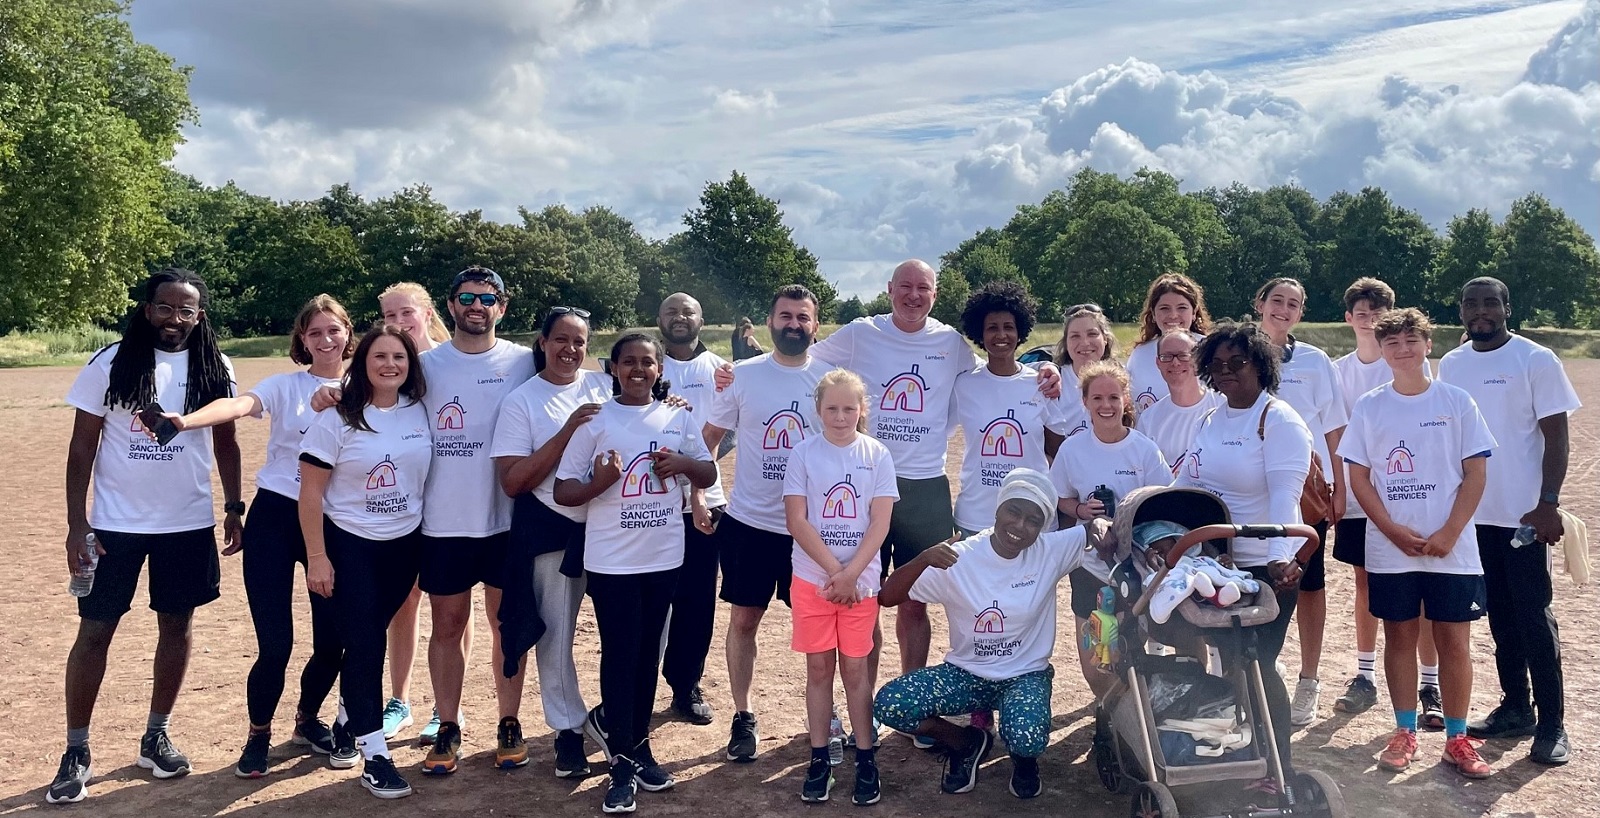 Runners including staff from Lambeth Sznctuary Services and Councillors line up for 5K fundraising fun run